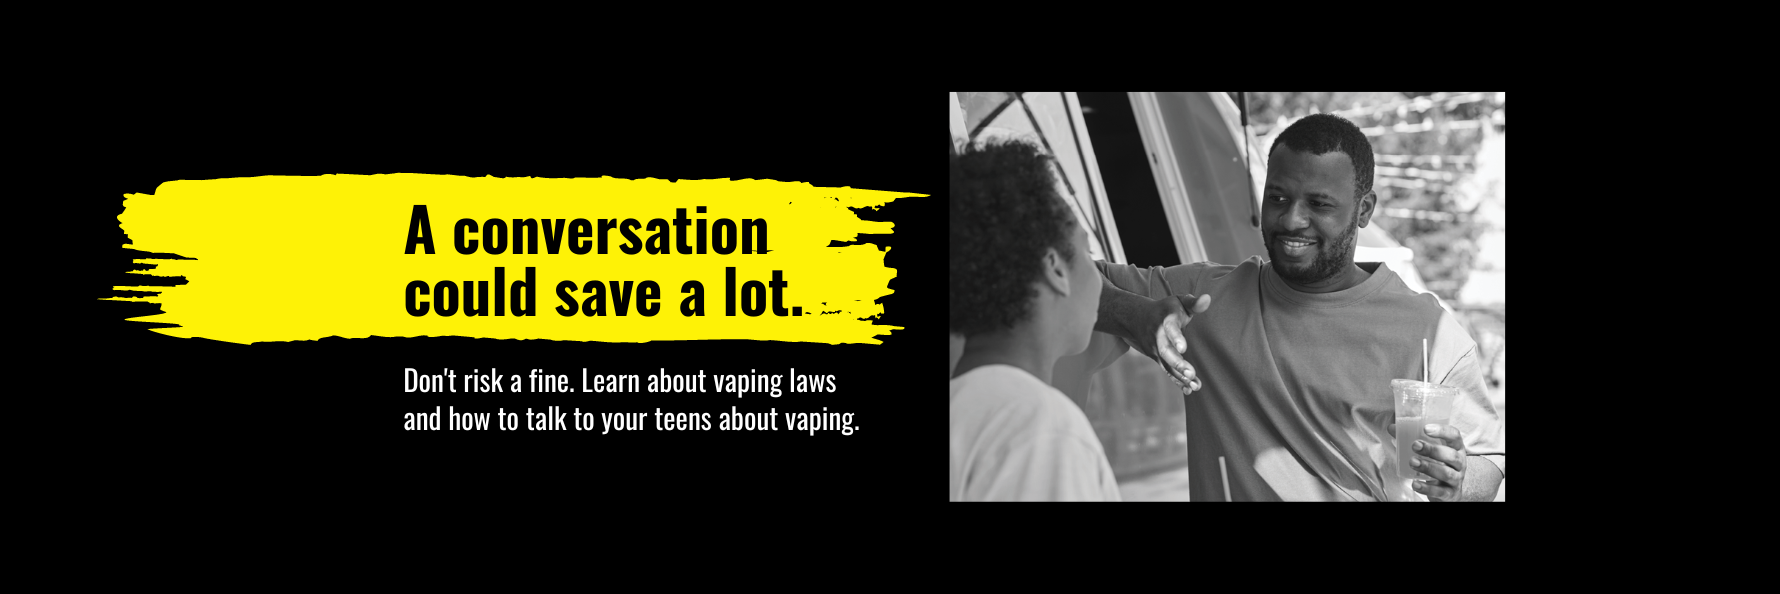 Image of a parent having a conversation with teen. Text: A conversation could save a lot. Don't risk a fine. Learn about vaping laws and how to talk to your teens about vaping.